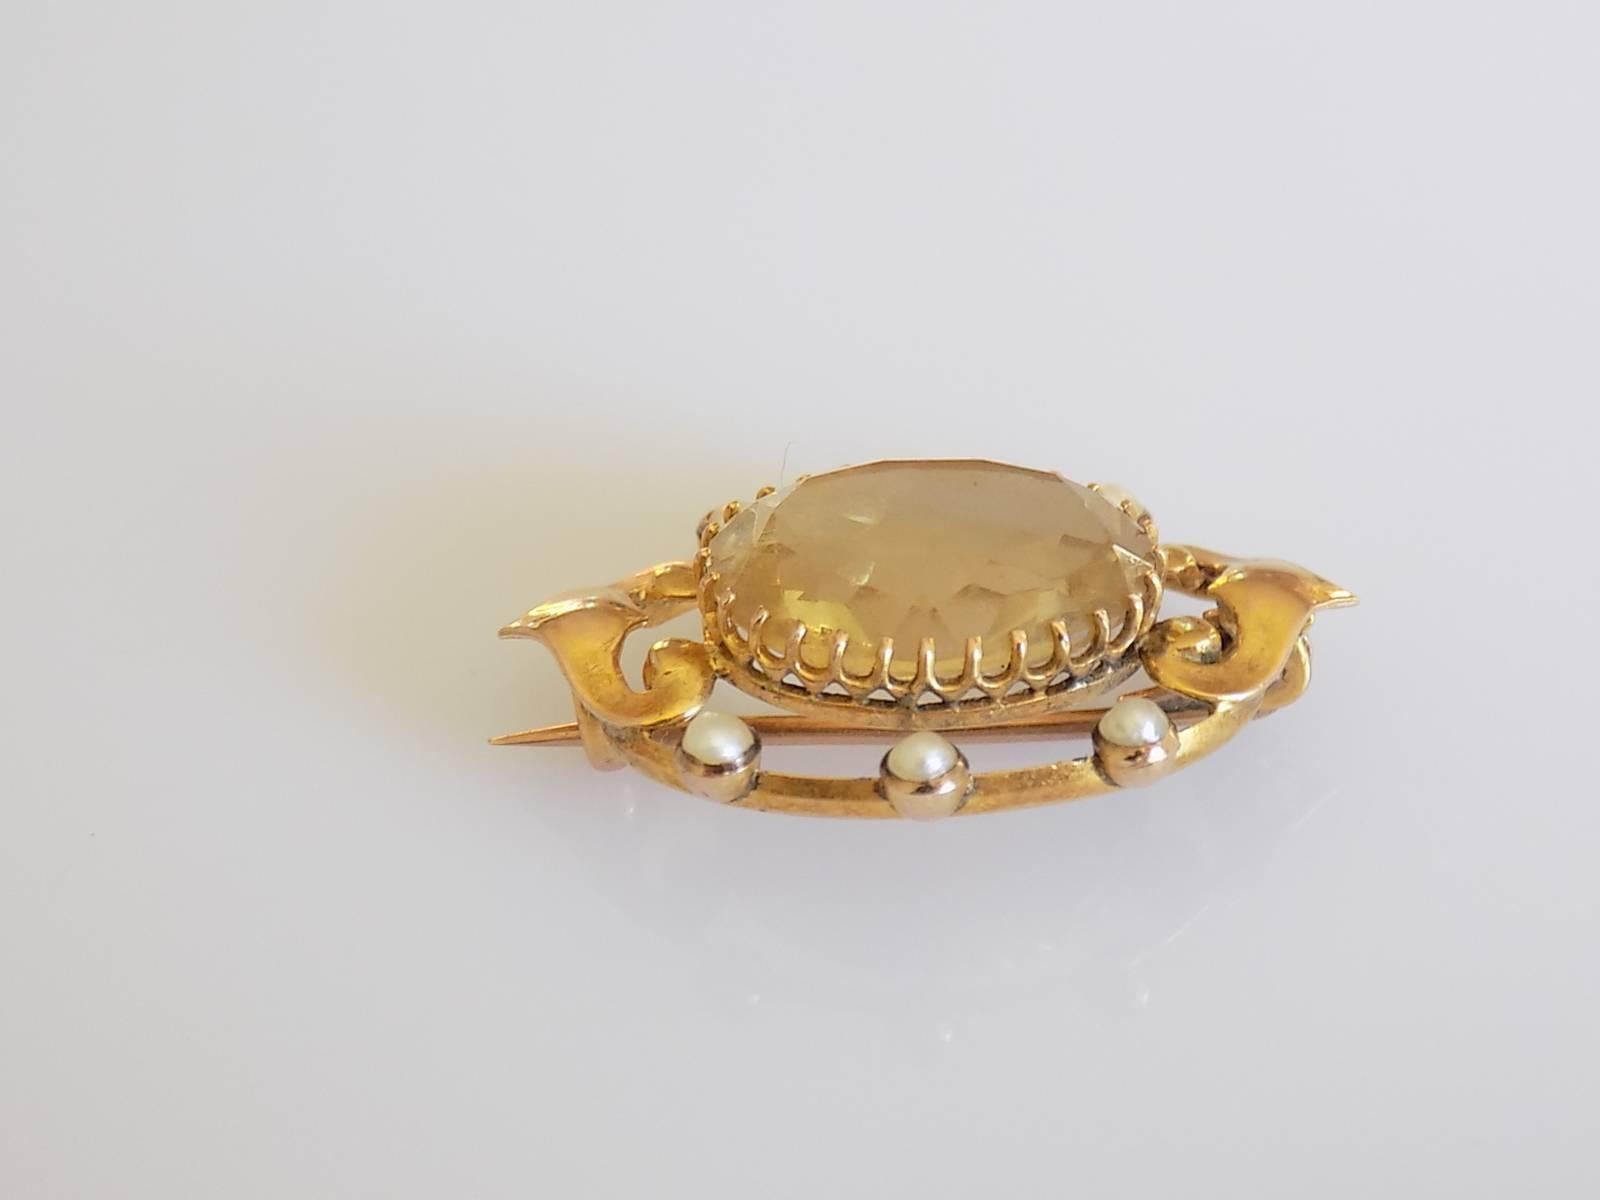 A Gorgeous Art Nouveau c.1900 9 Carat Yellow Gold, Golden Citrine and split Pearl brooch. English origin.
Length 28mm, Width 19mm.
Citrine 15mm x 12mm.
Weight 3.1gr.
Marked 9CT for 9 Carat Gold.